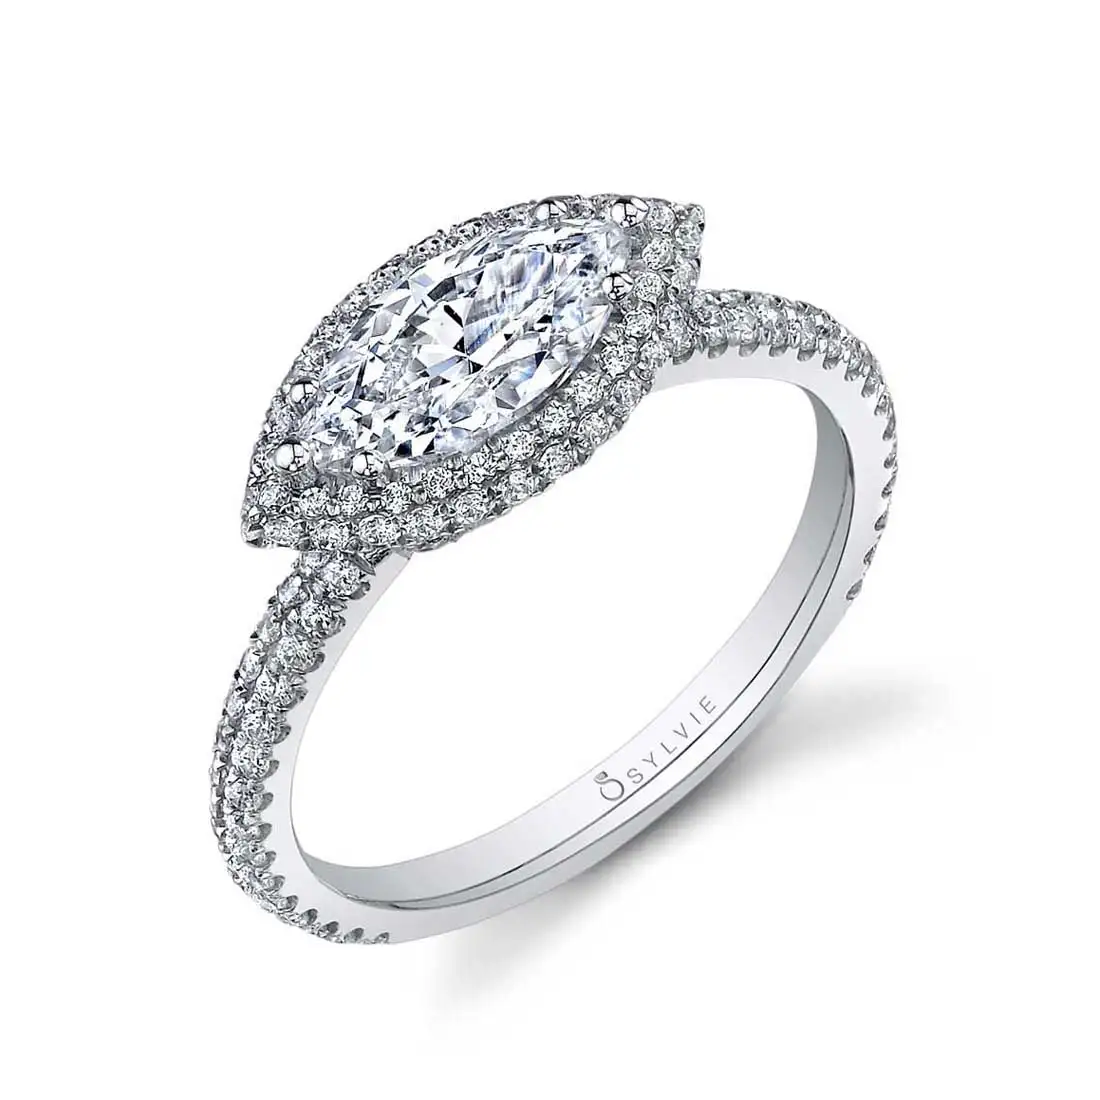 Profile Image of an East West Marquise Shaped Halo Engagement Ring